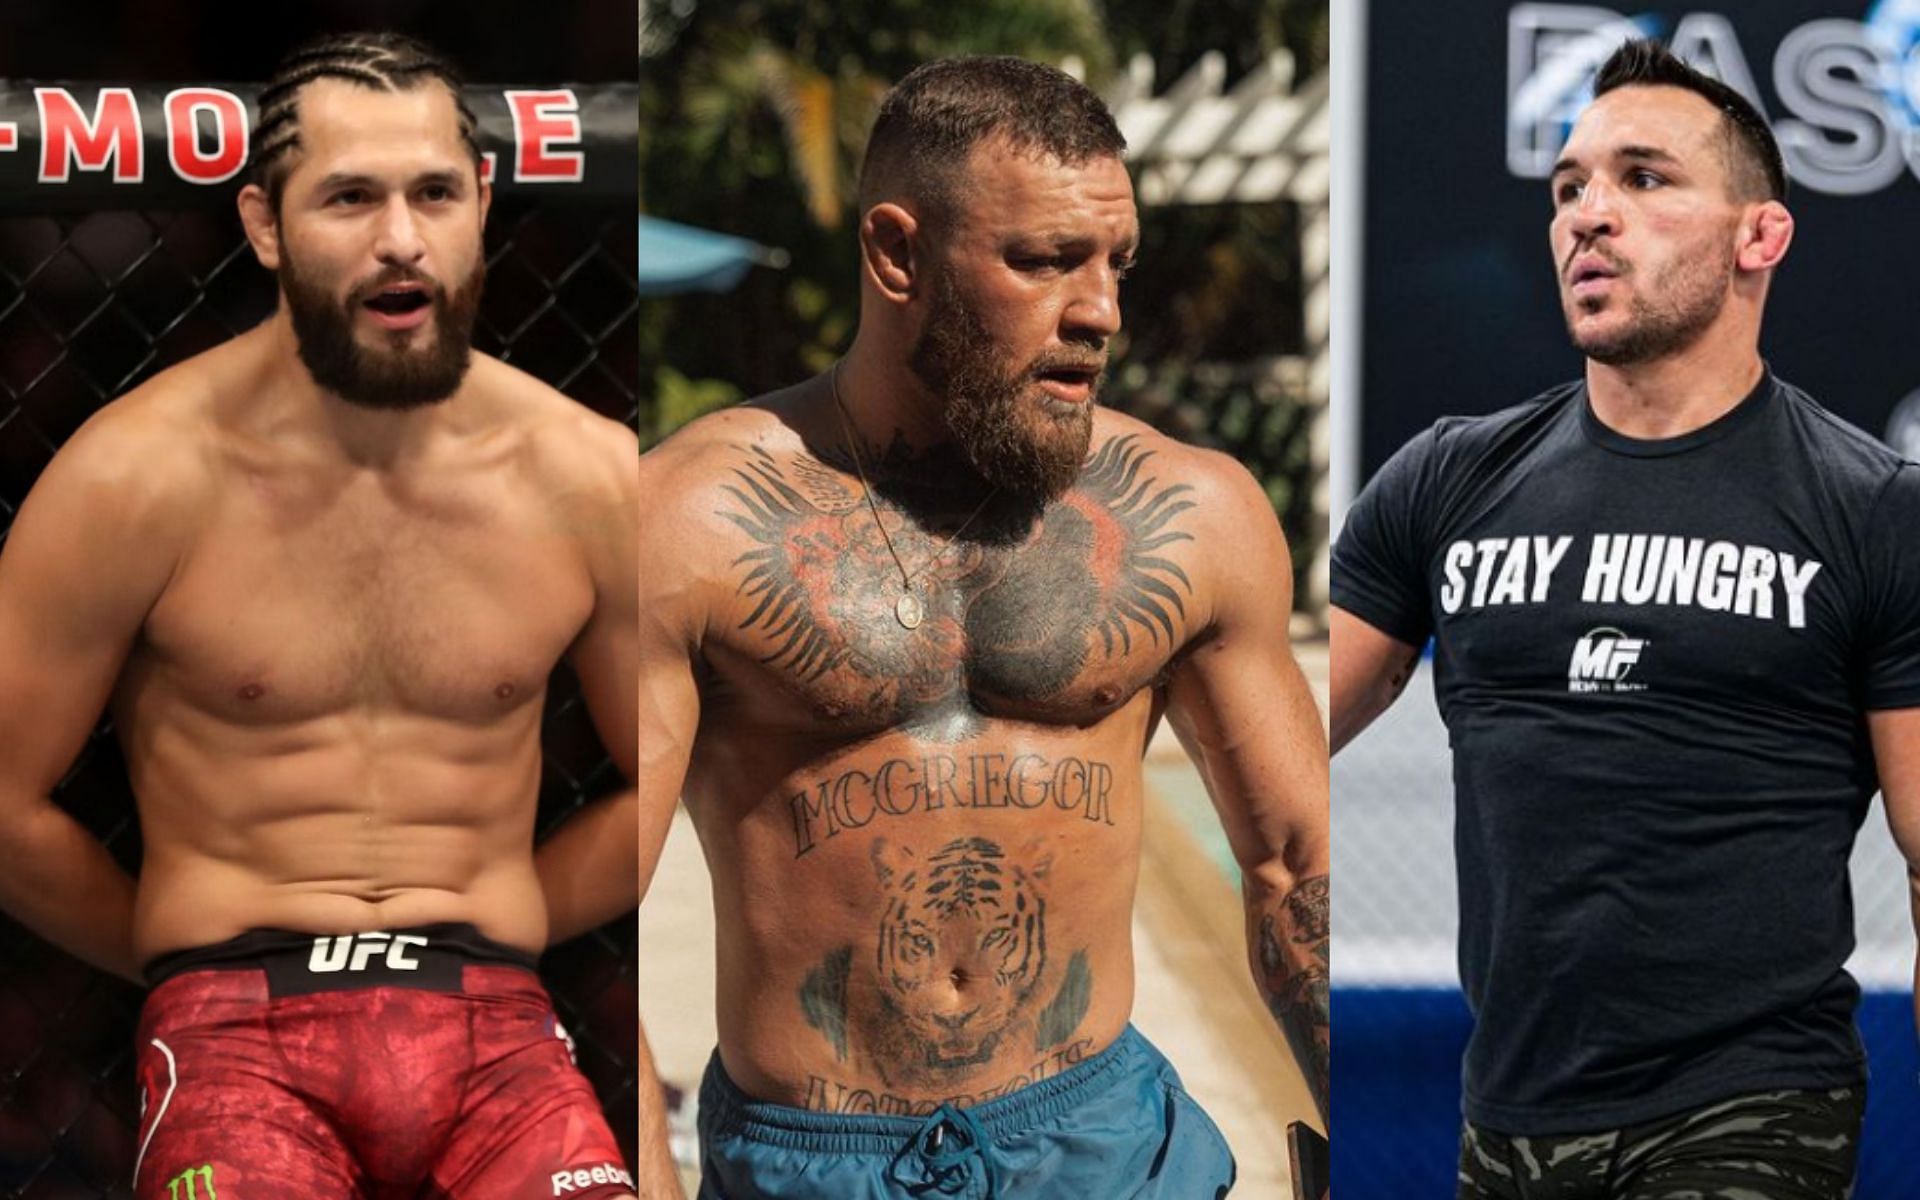 Fans speculate on potential opposing coach for McGregor in his second TUF appearance after Conor McGregor vs. Urijah Faber [Images via: @thenotoriousmma and @mikechandlermma on Instagram]